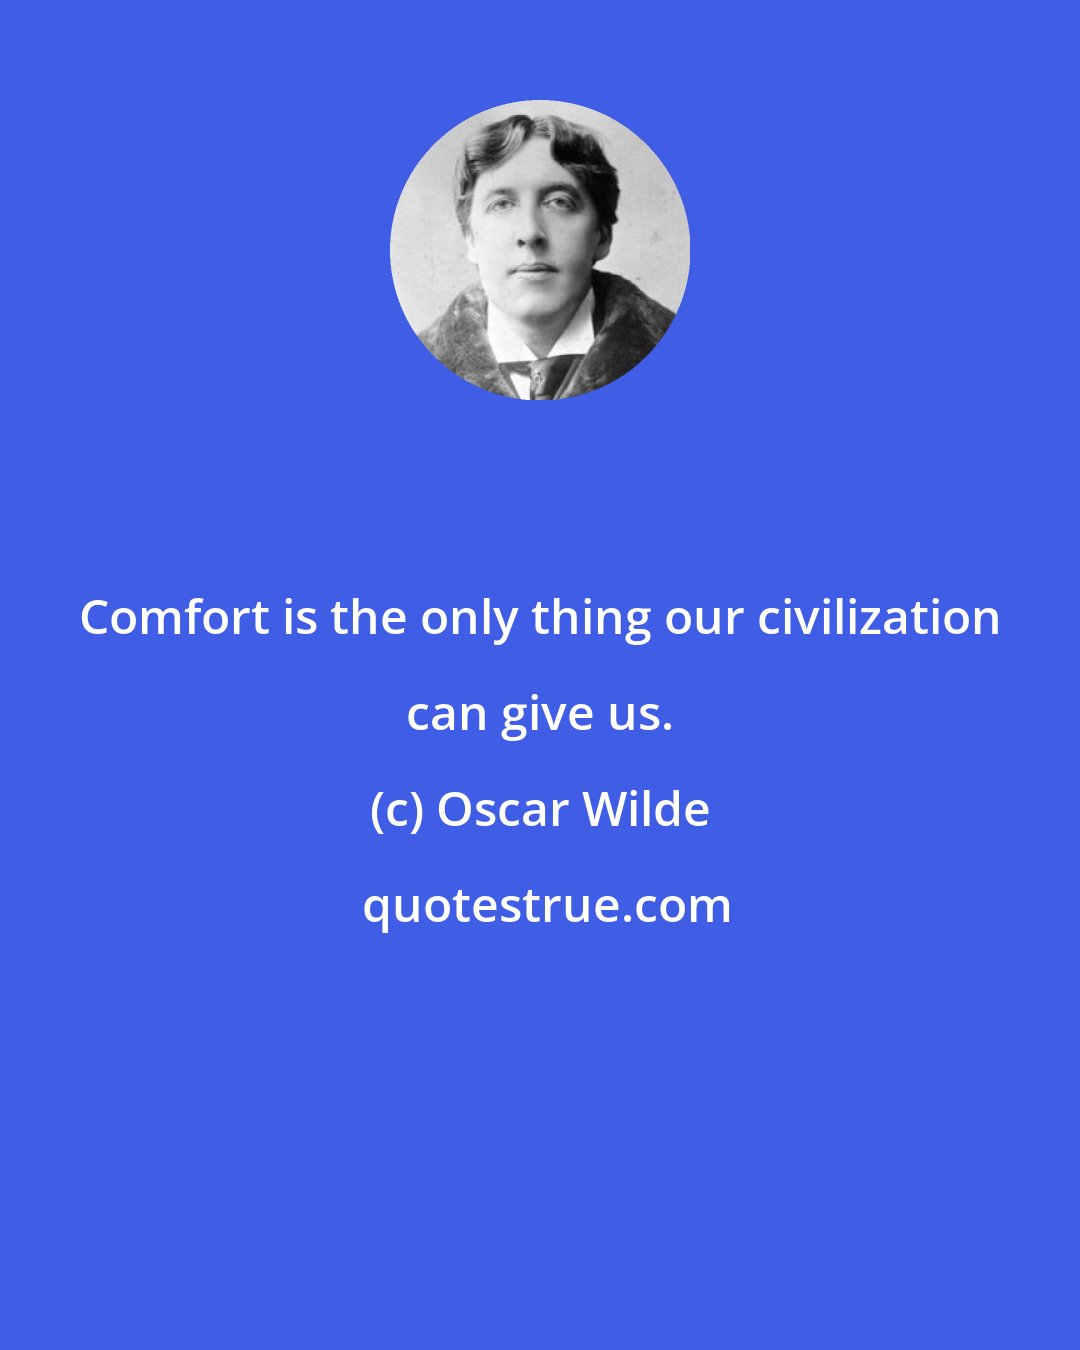 Oscar Wilde: Comfort is the only thing our civilization can give us.